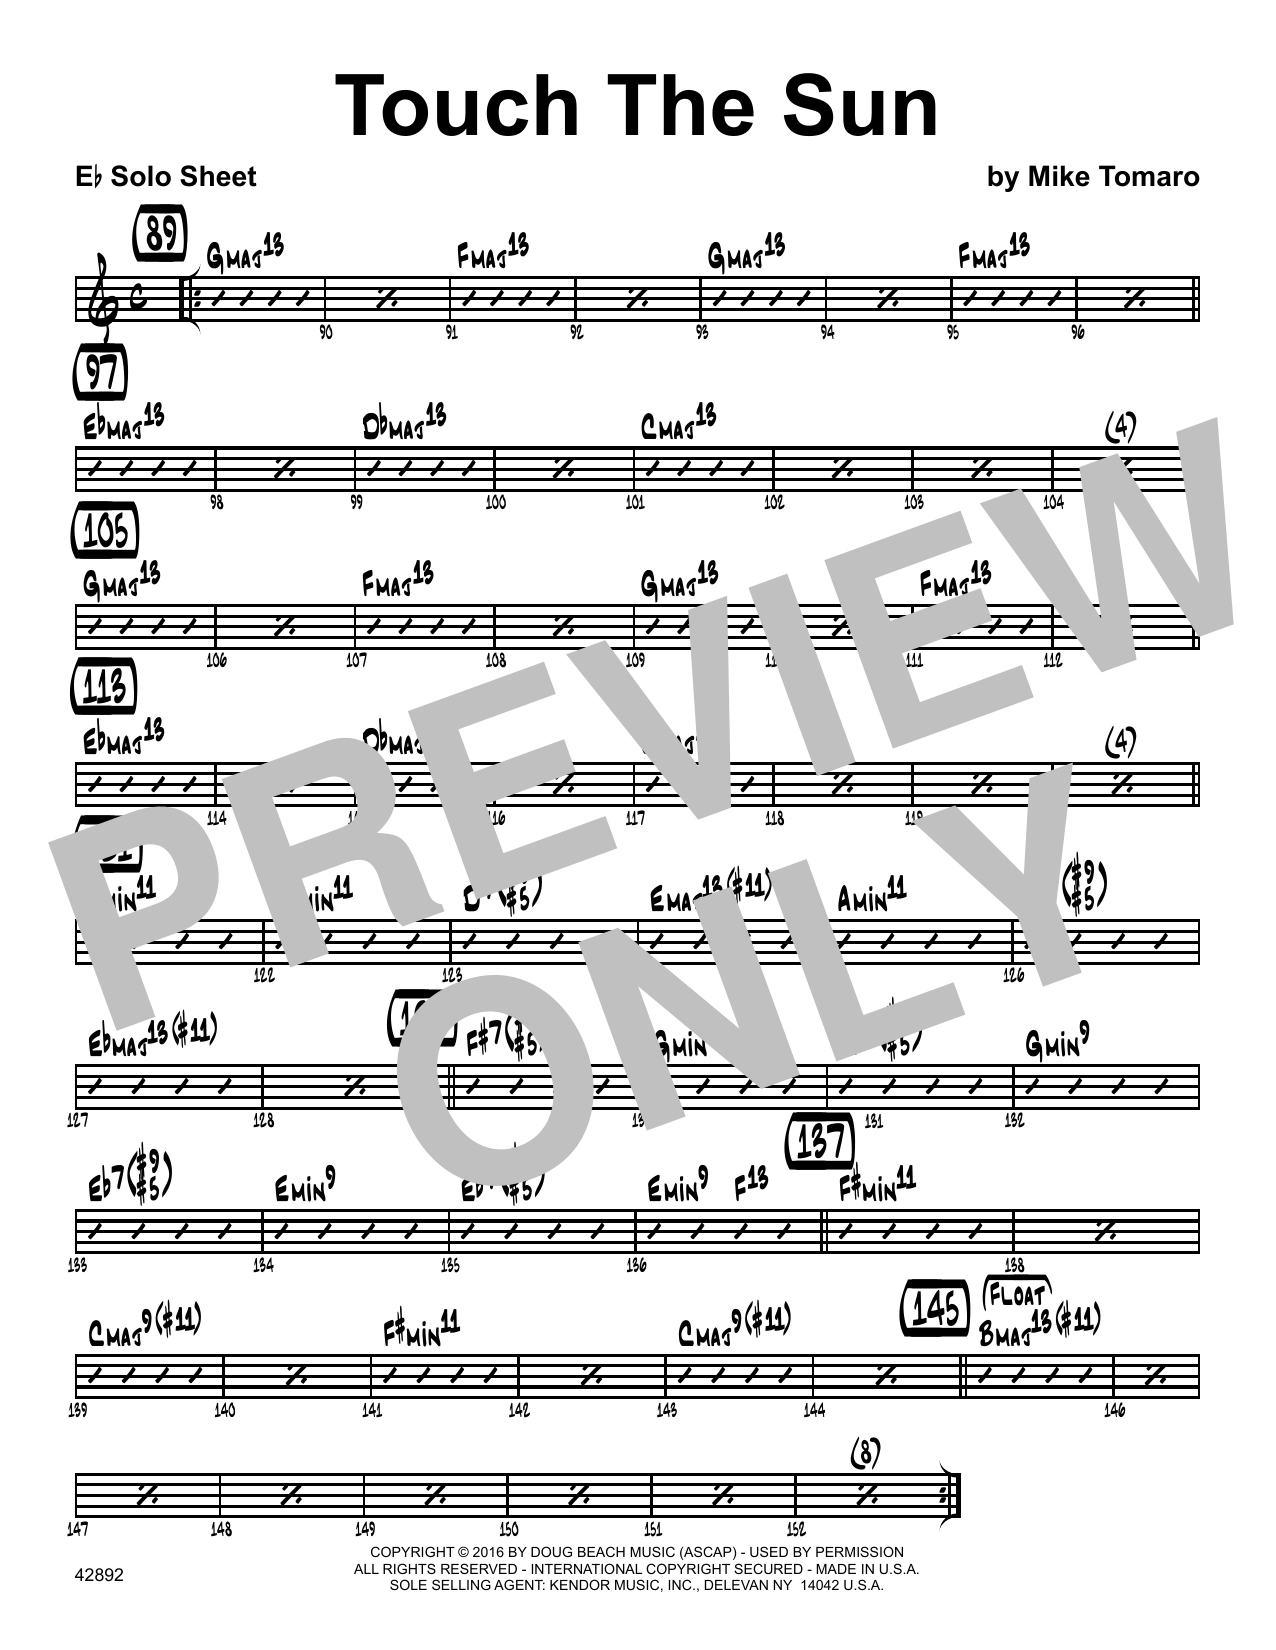 Download Mike Tomaro Touch The Sun - Eb Solo Sheet Sheet Music